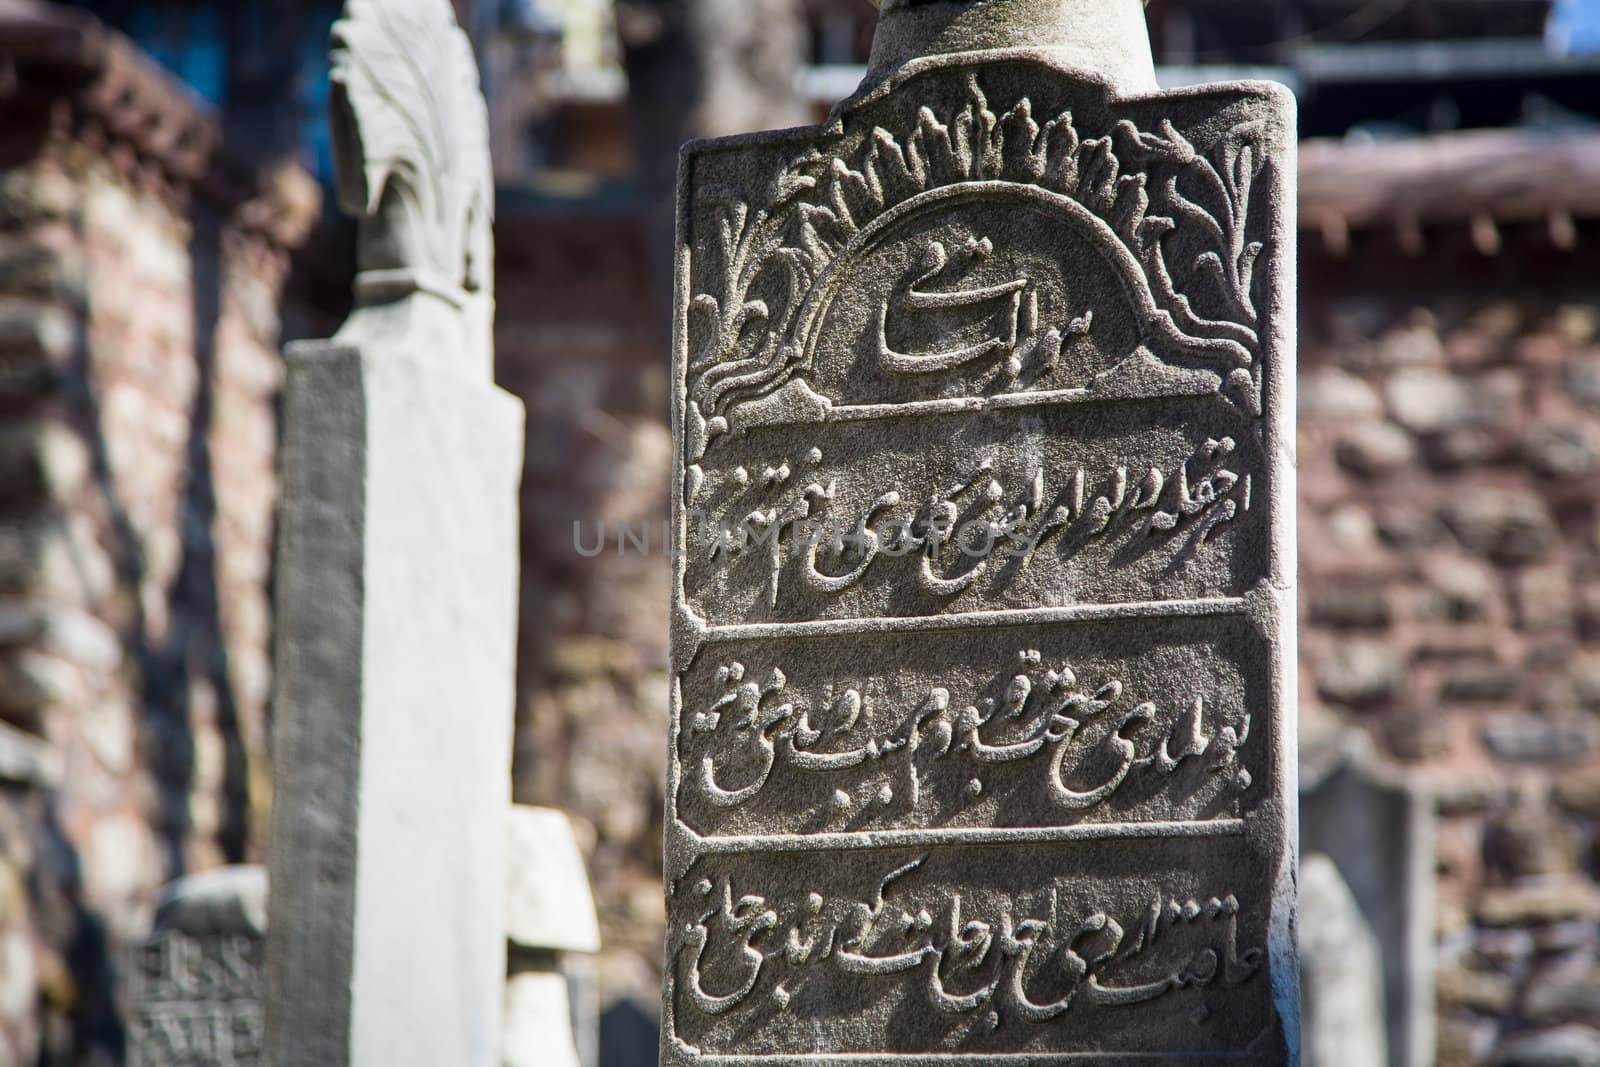 Islamic gravestone in a cemetery by totony